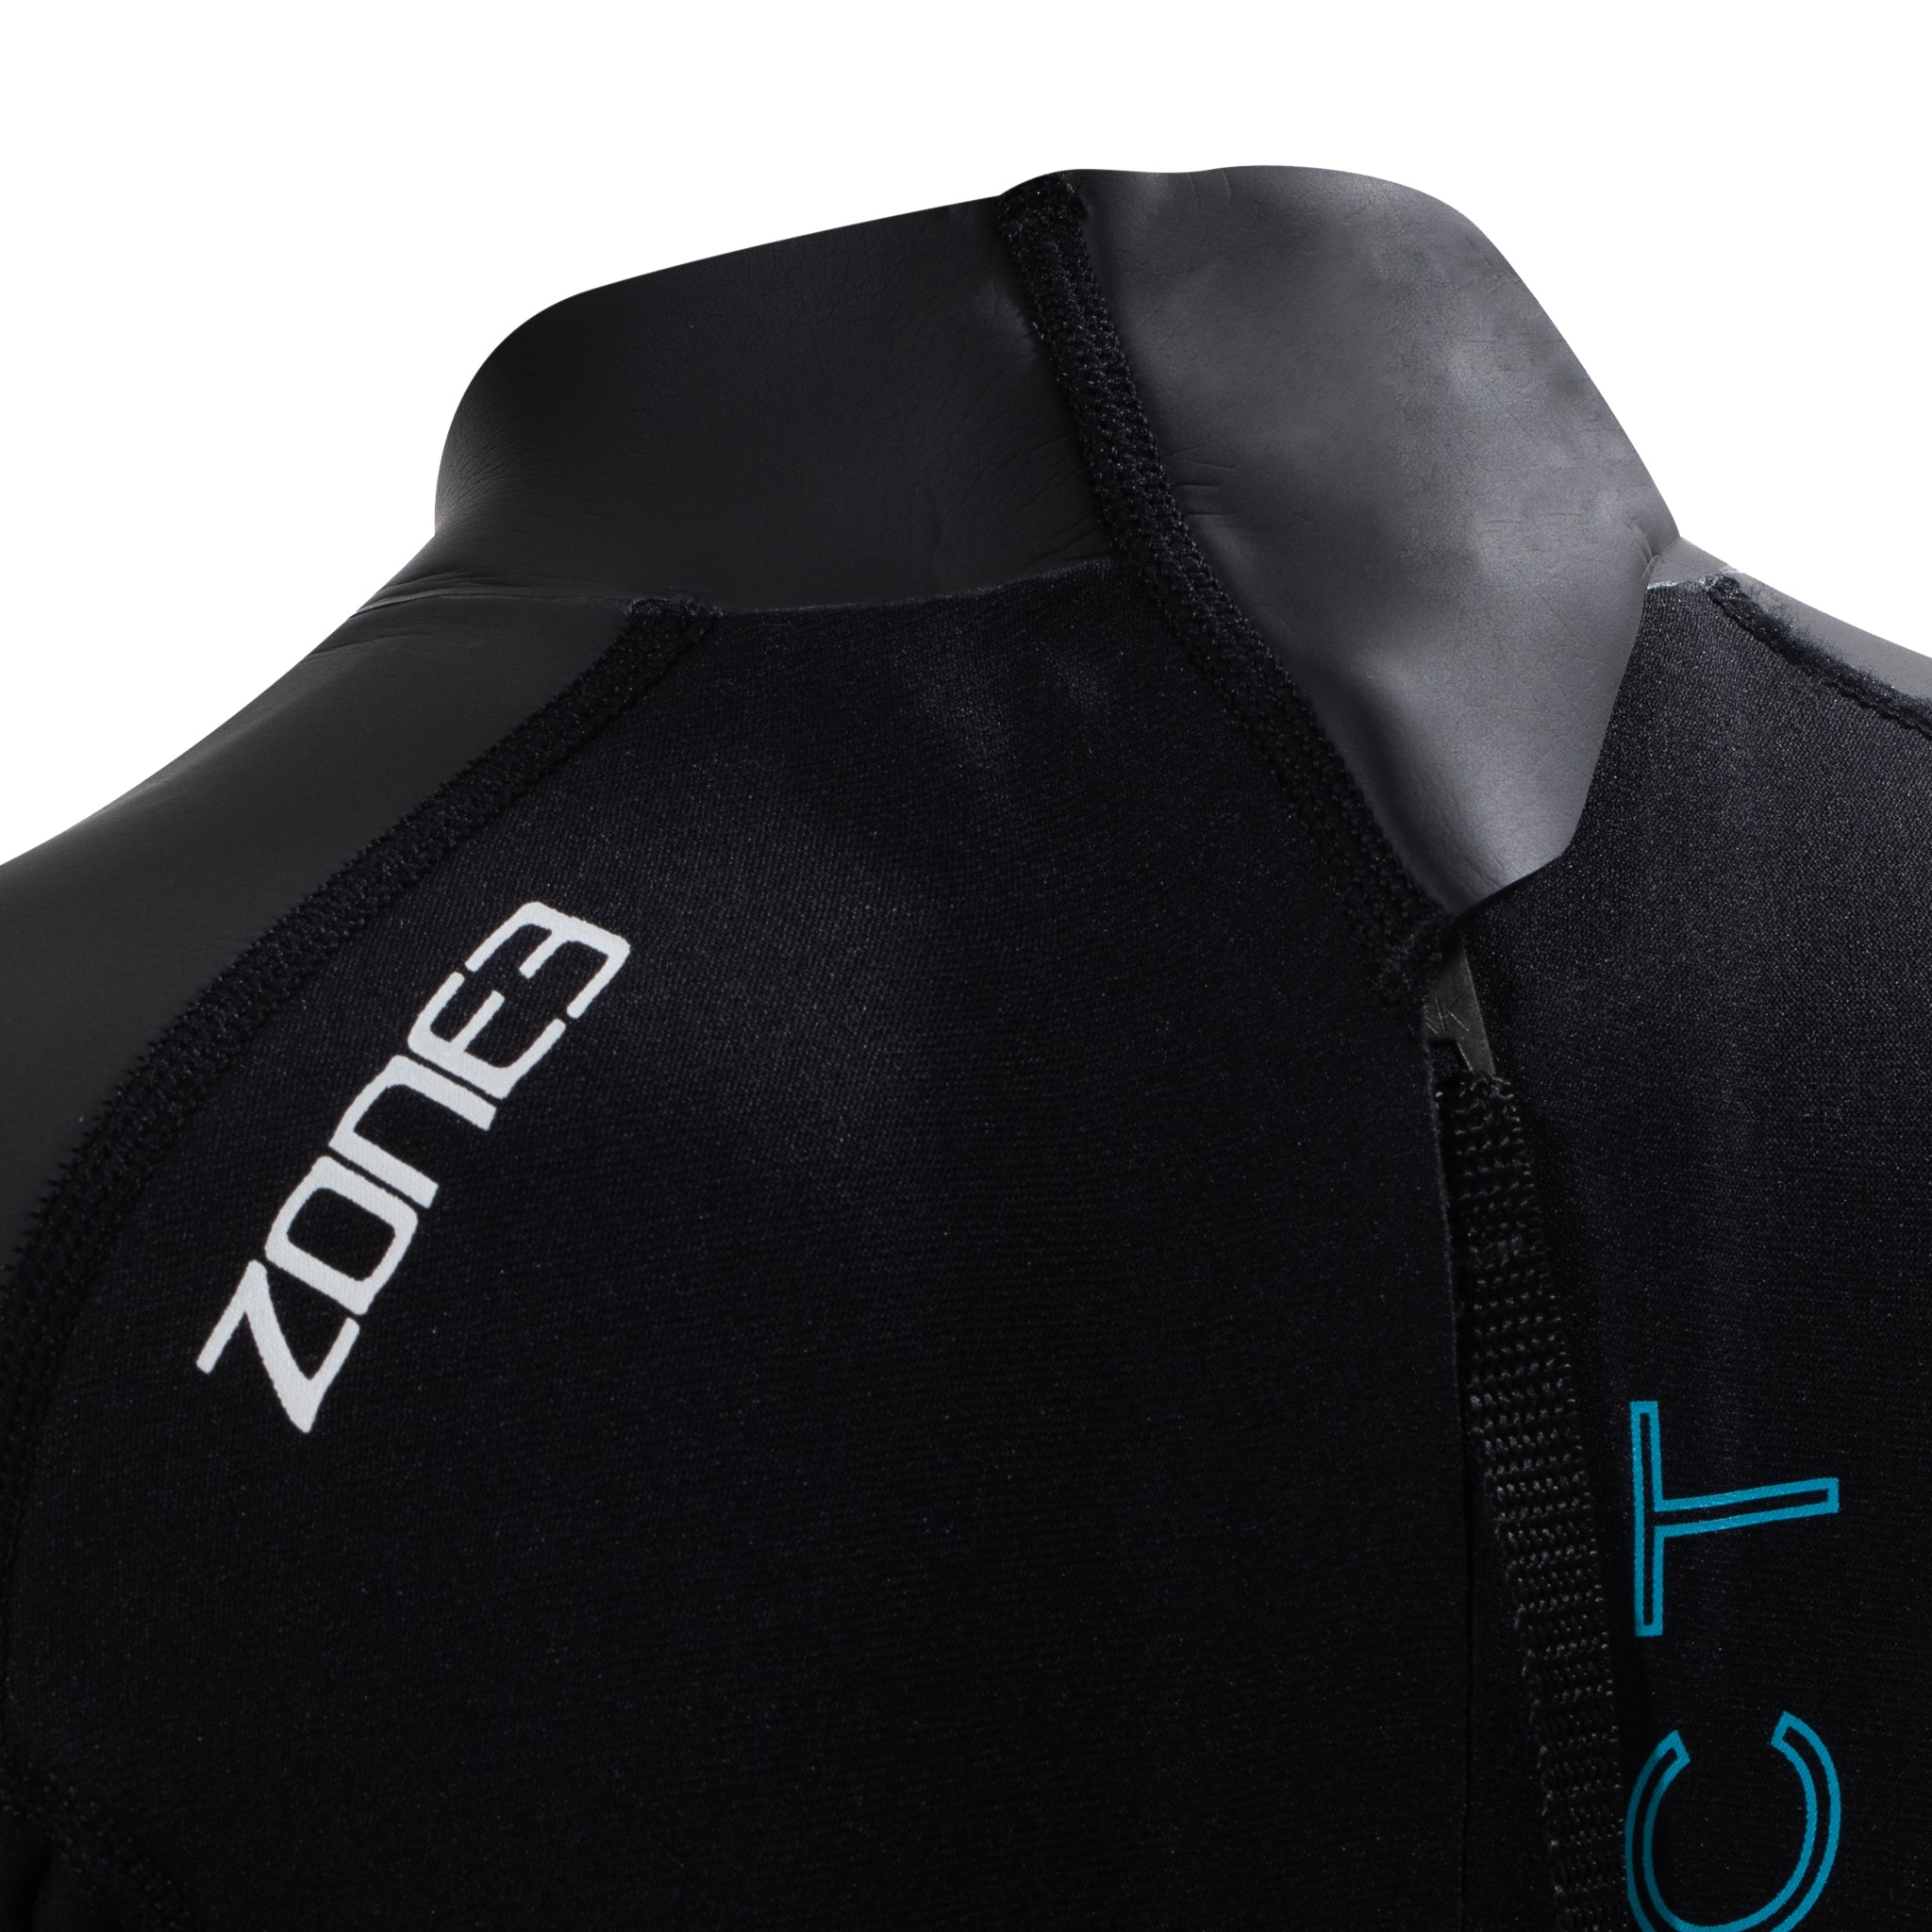 Zone3 Aspect Junior Open Water Swimming Wetsuit | Neck back detail